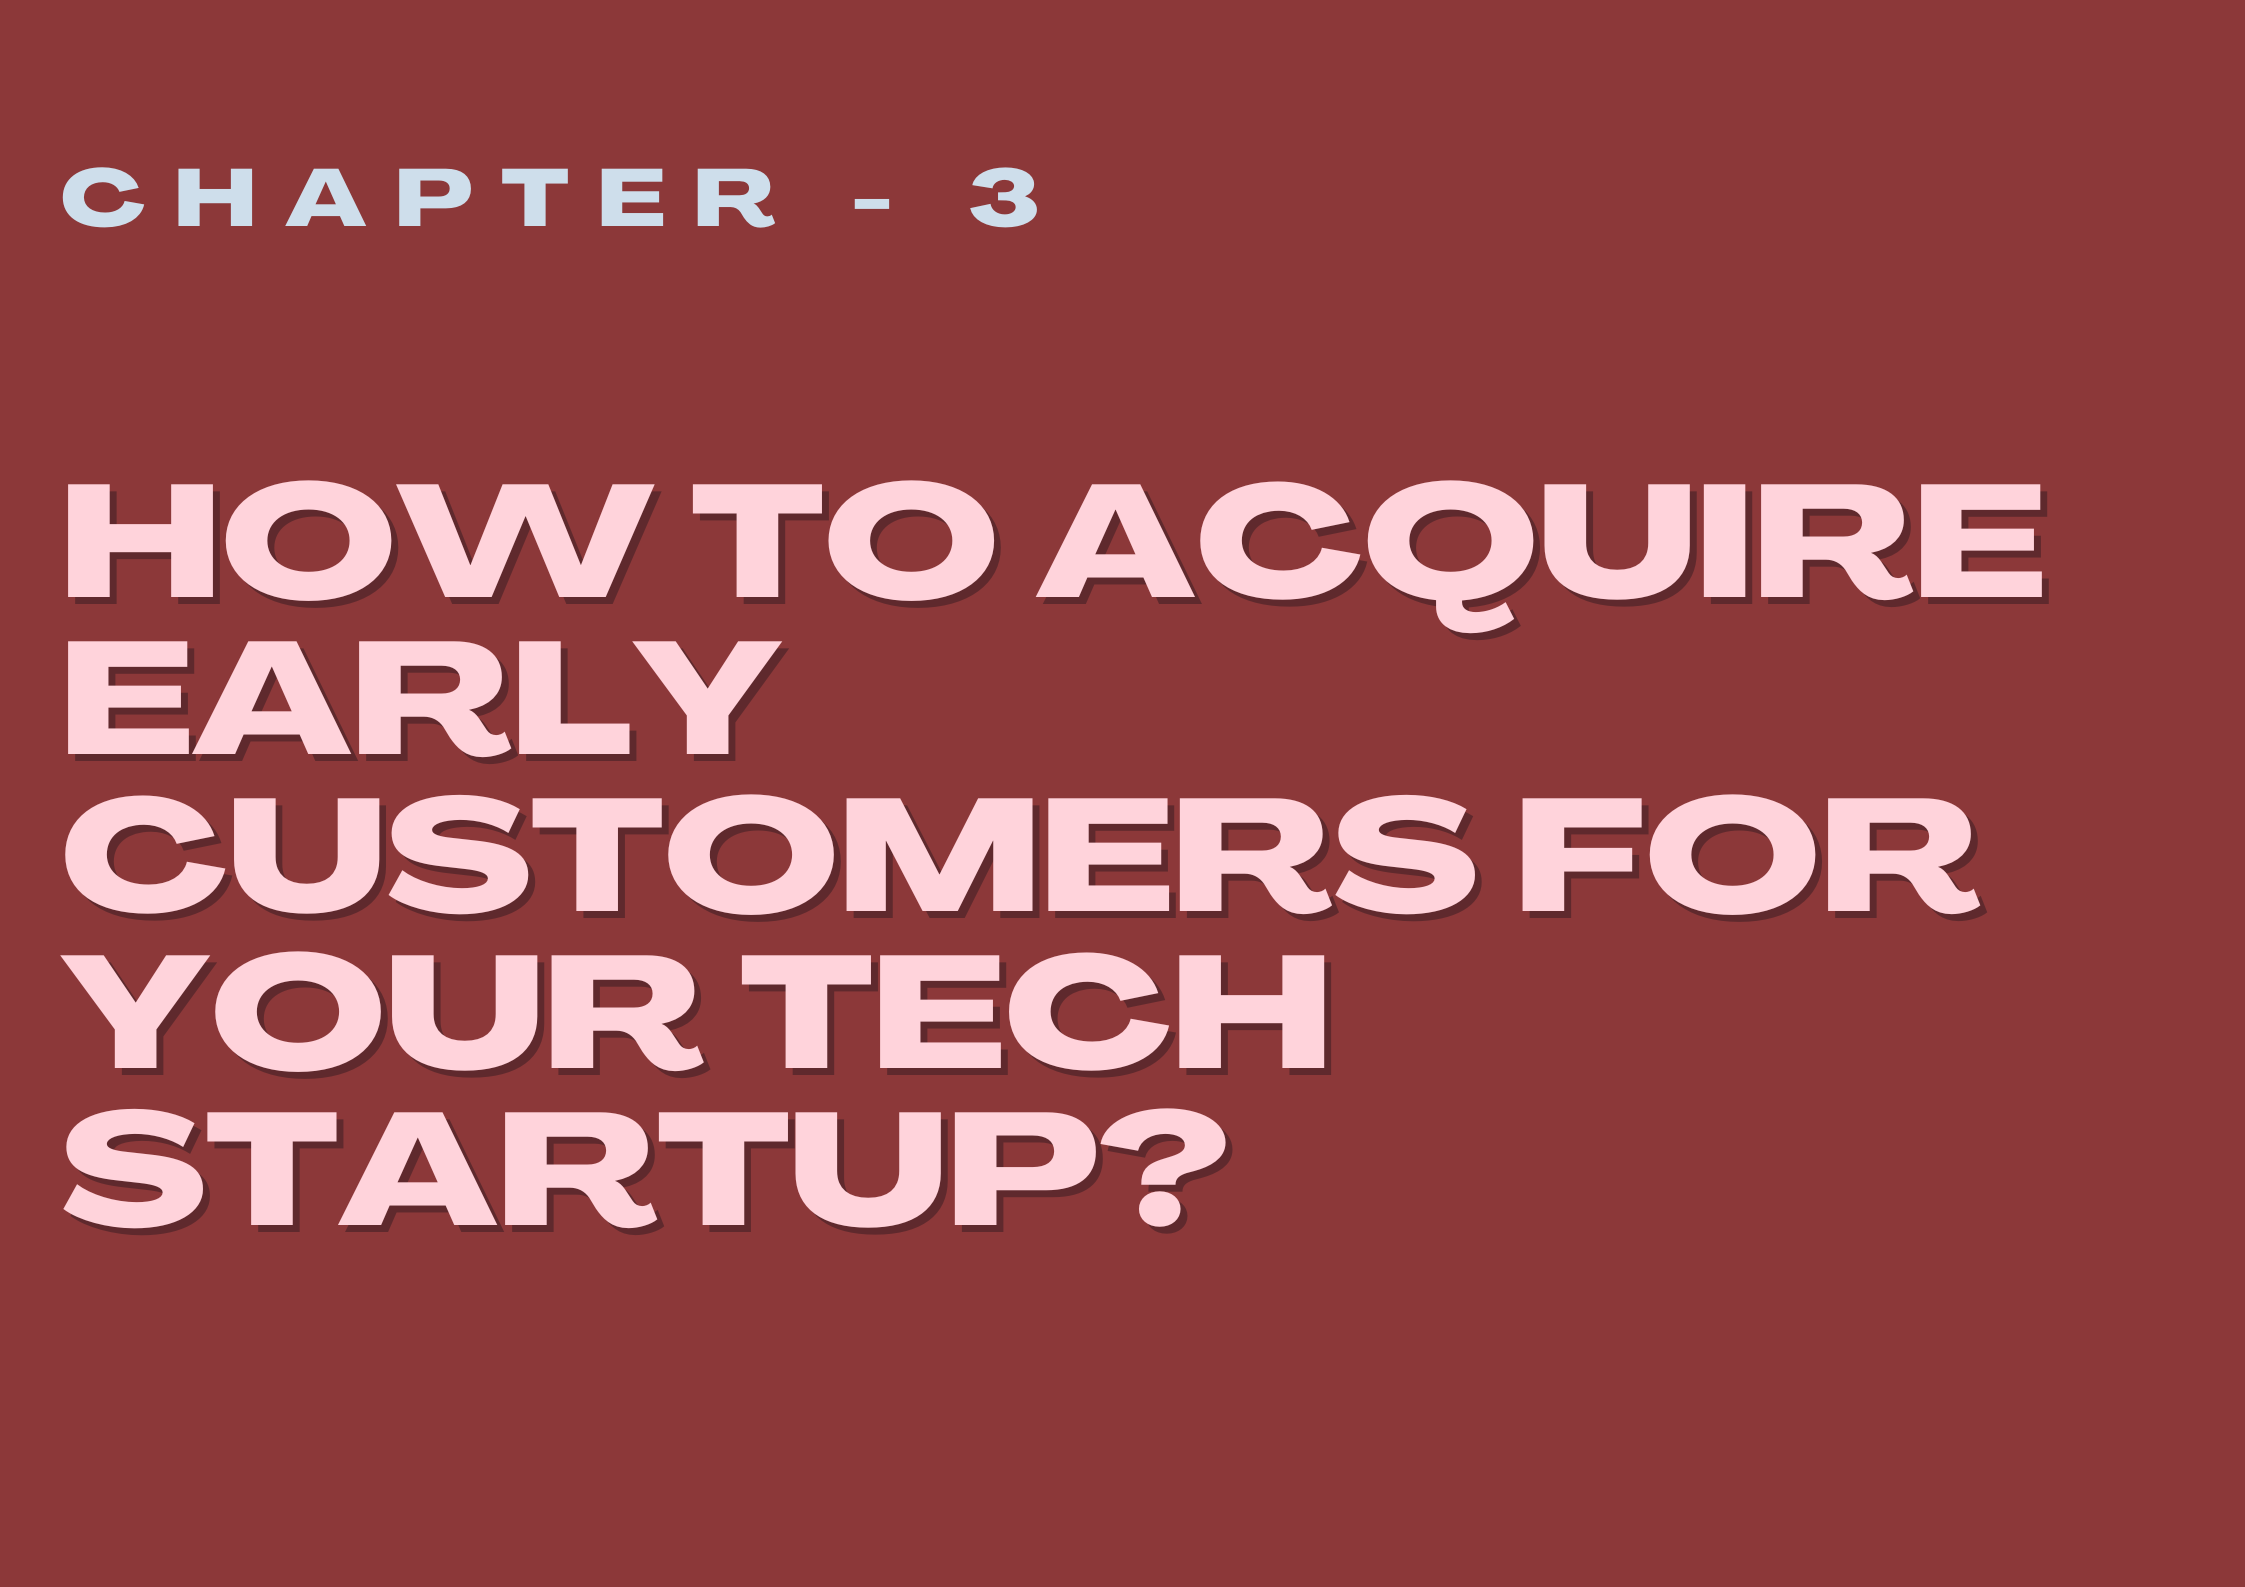 How to Acquire Early Customers for Your Tech Startup?